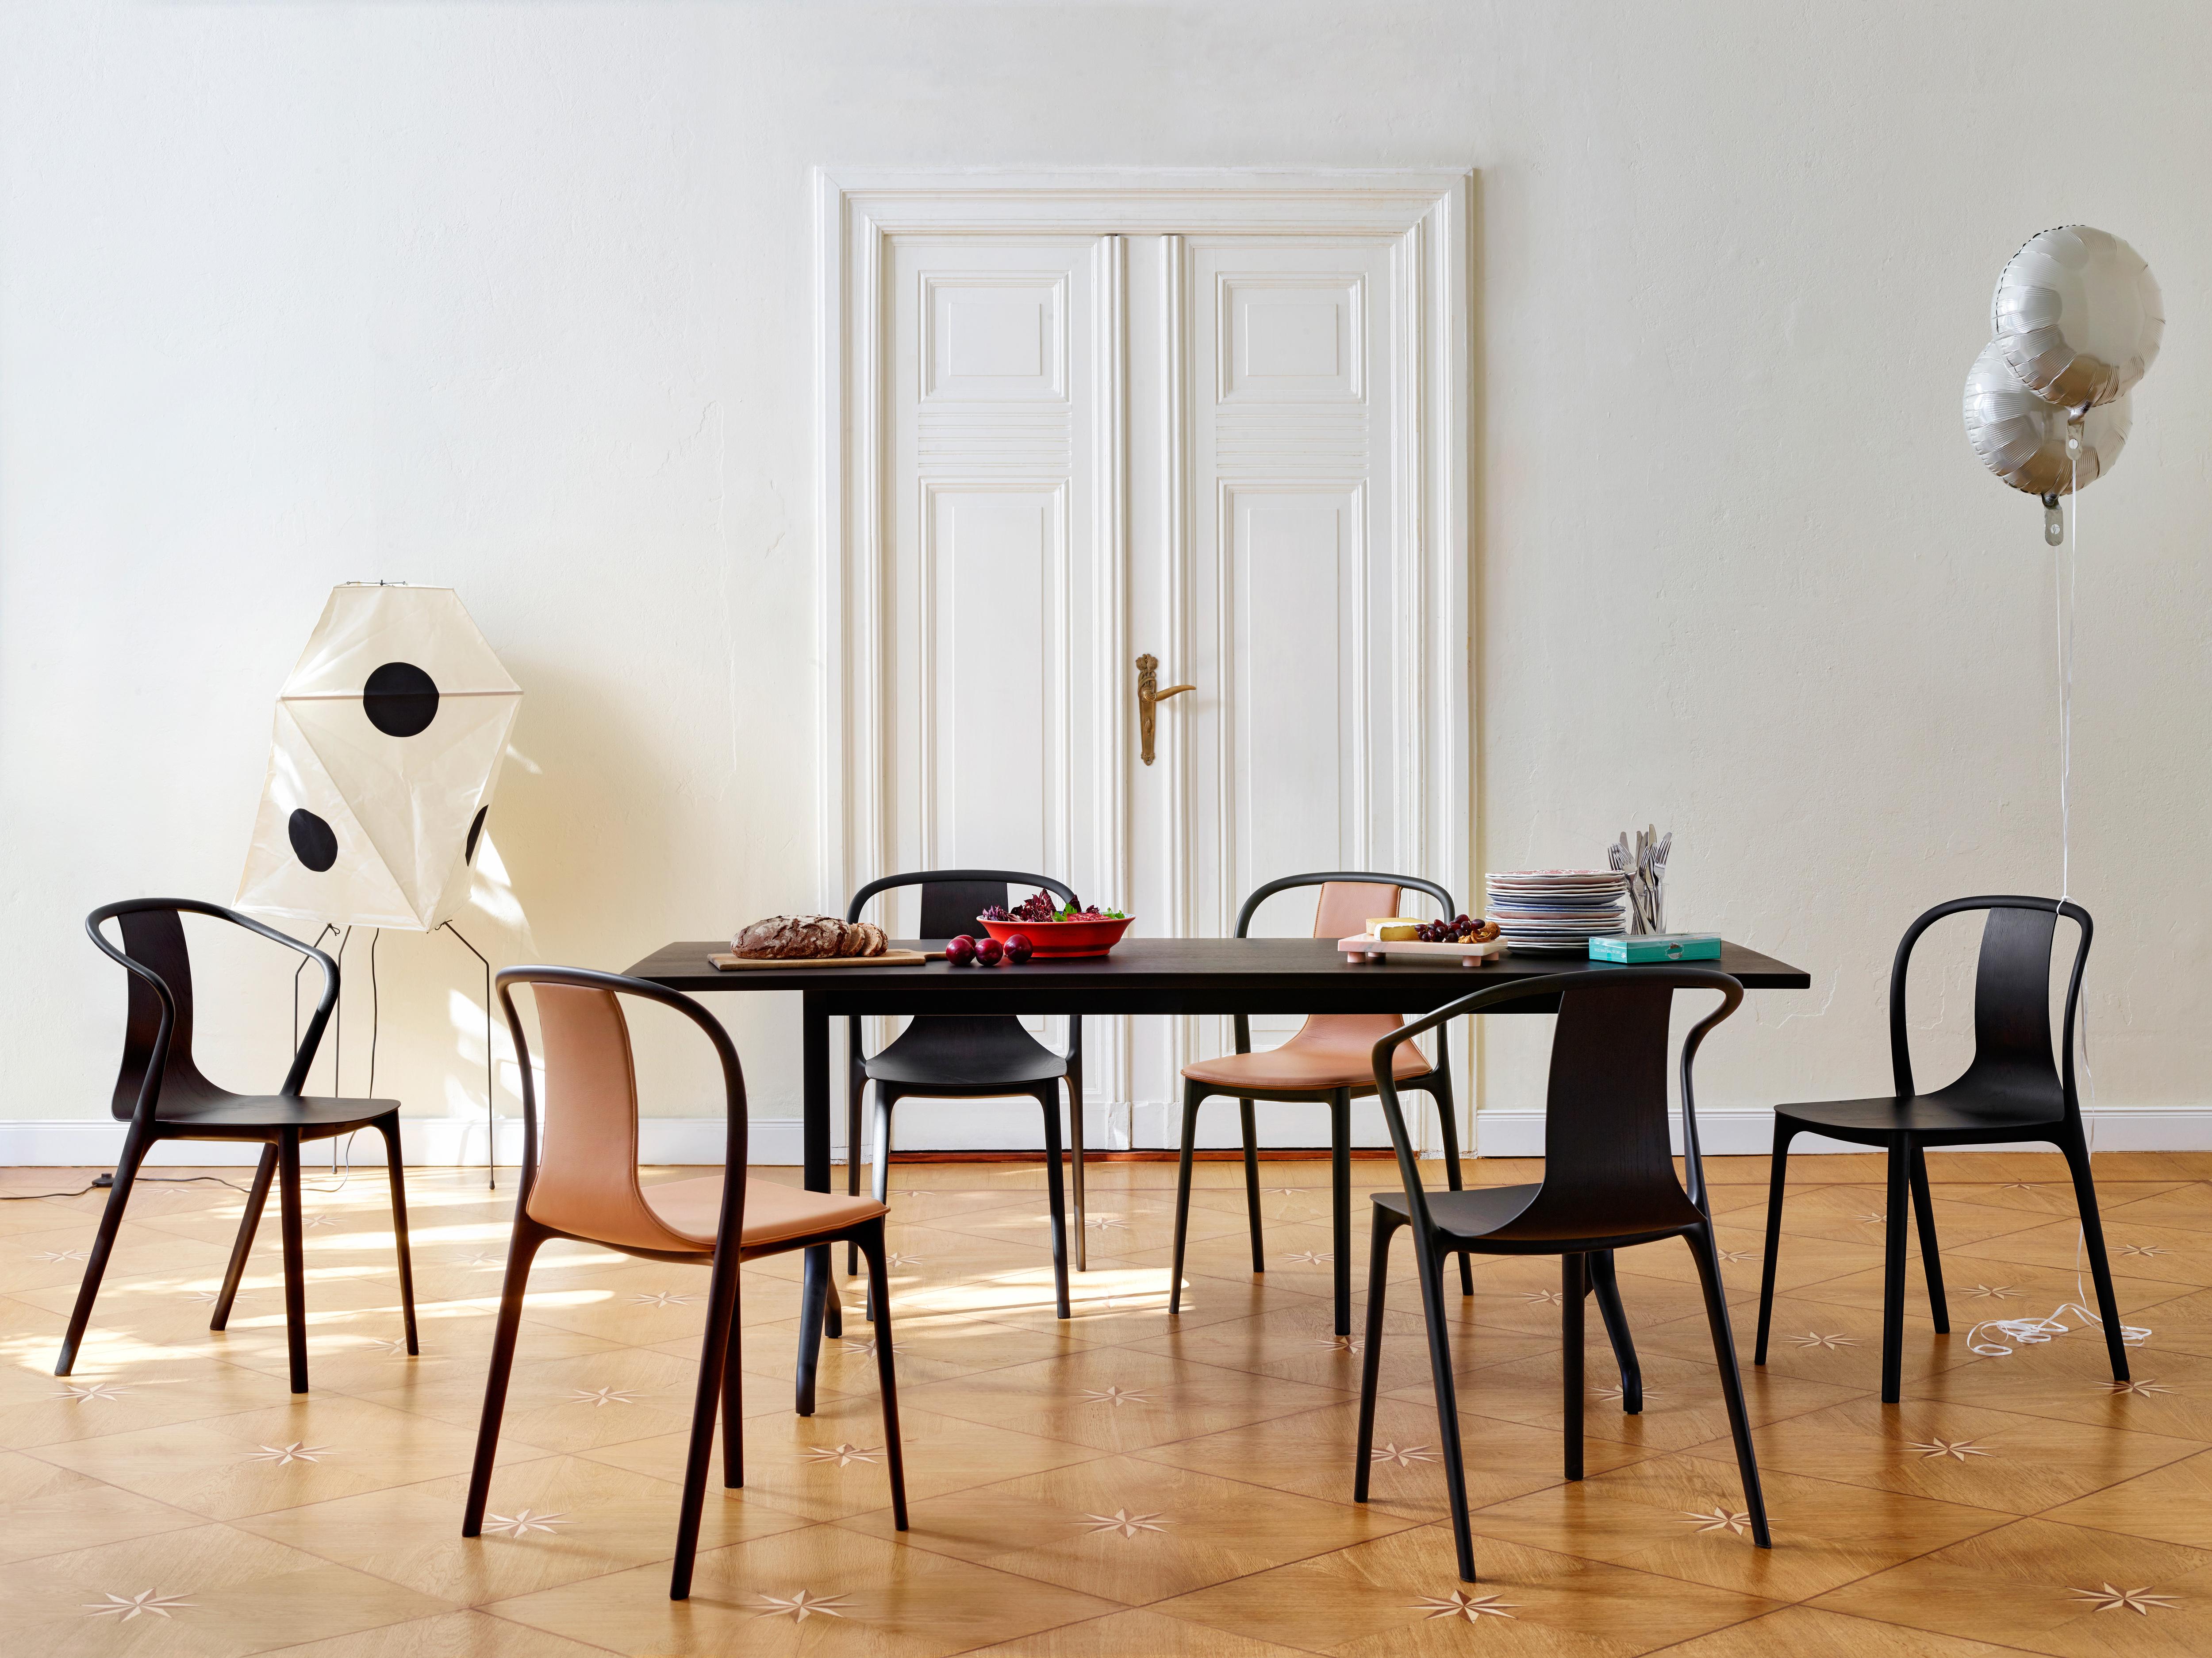 Molded Vitra Belleville Chair in Asphalt Leather by Ronan & Erwan Bouroullec For Sale